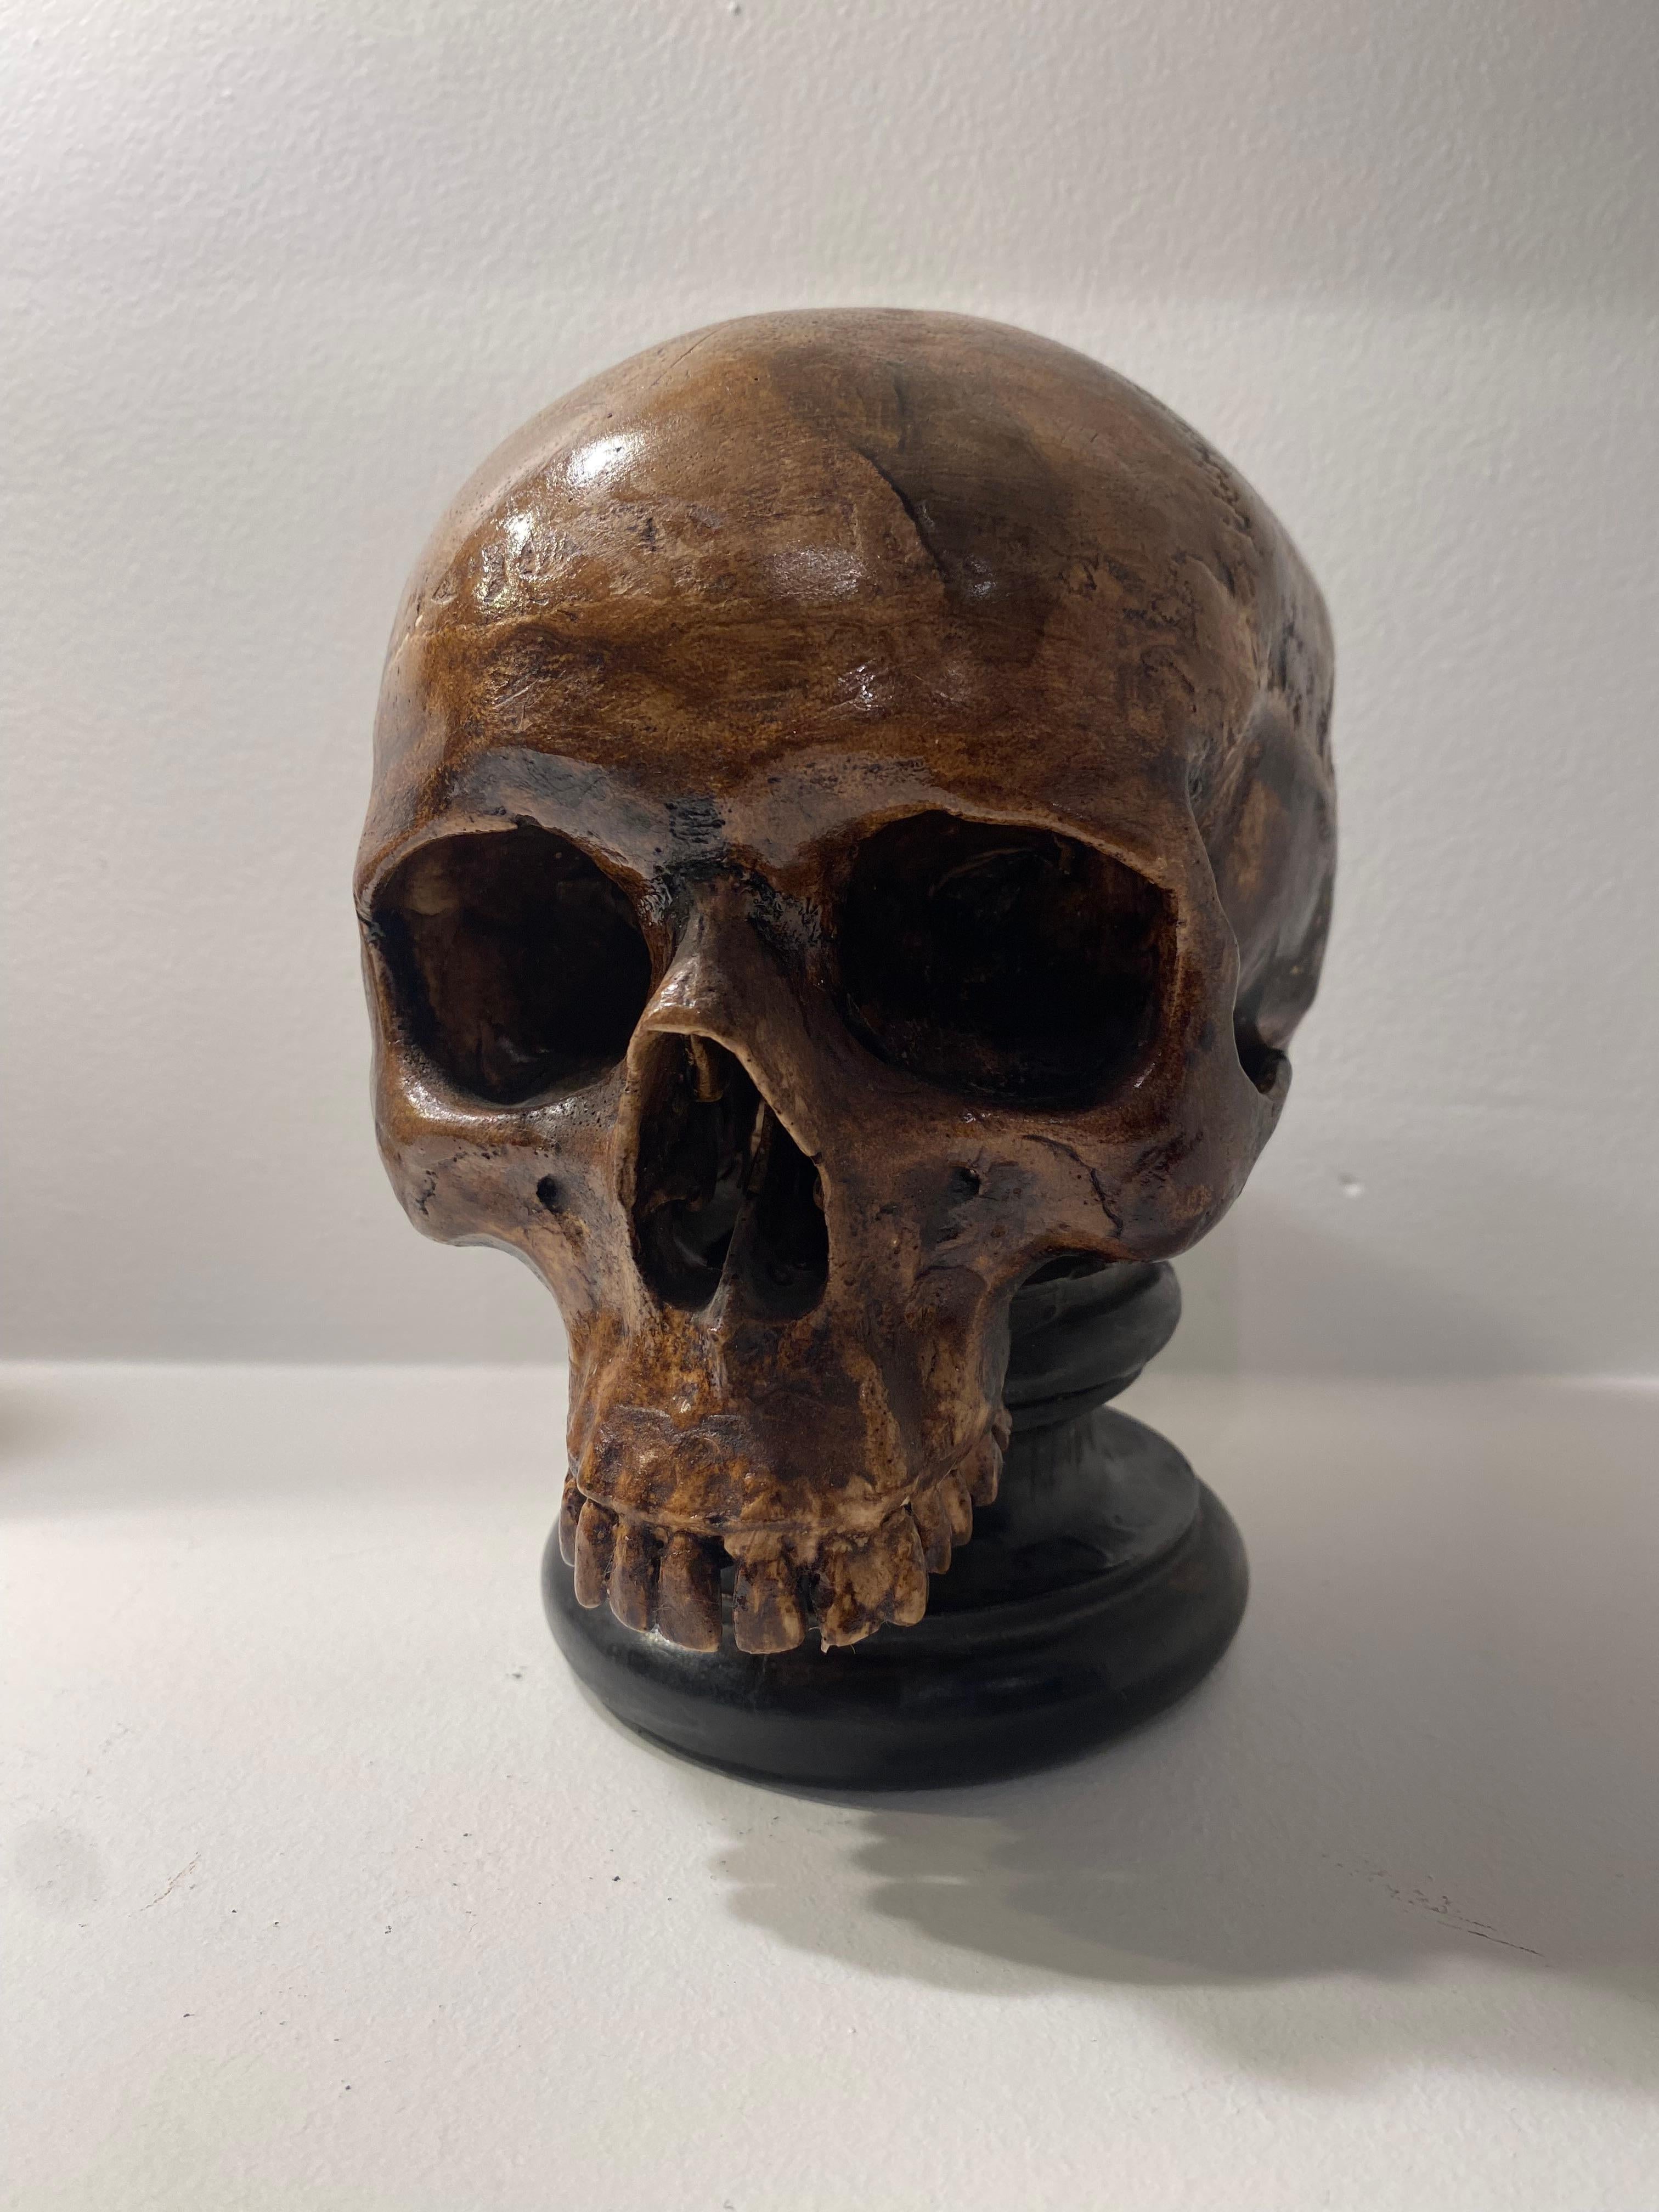 Exceptional French sculpture of a human skull,
warm Brown colored Terracotta with a good,old patina,
mounted on a black base,
nice and refined sculpting with an eye for detail,
very decorative and powerful object, to complete your Cabinet de